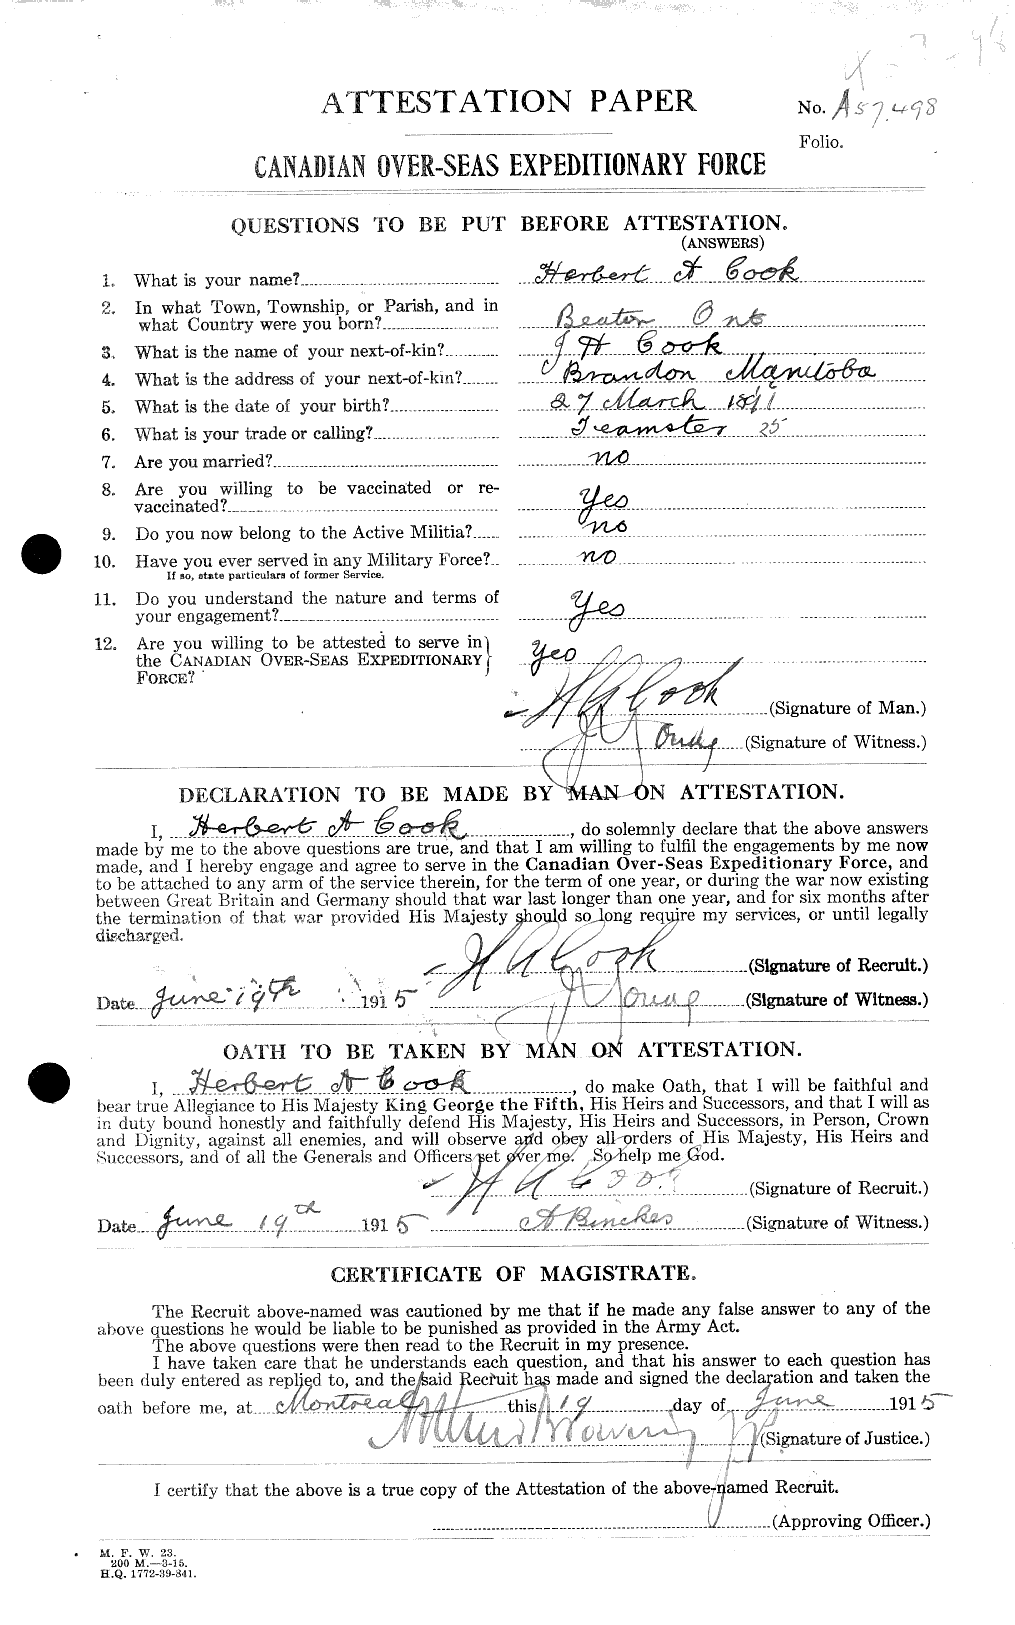 Personnel Records of the First World War - CEF 041478a